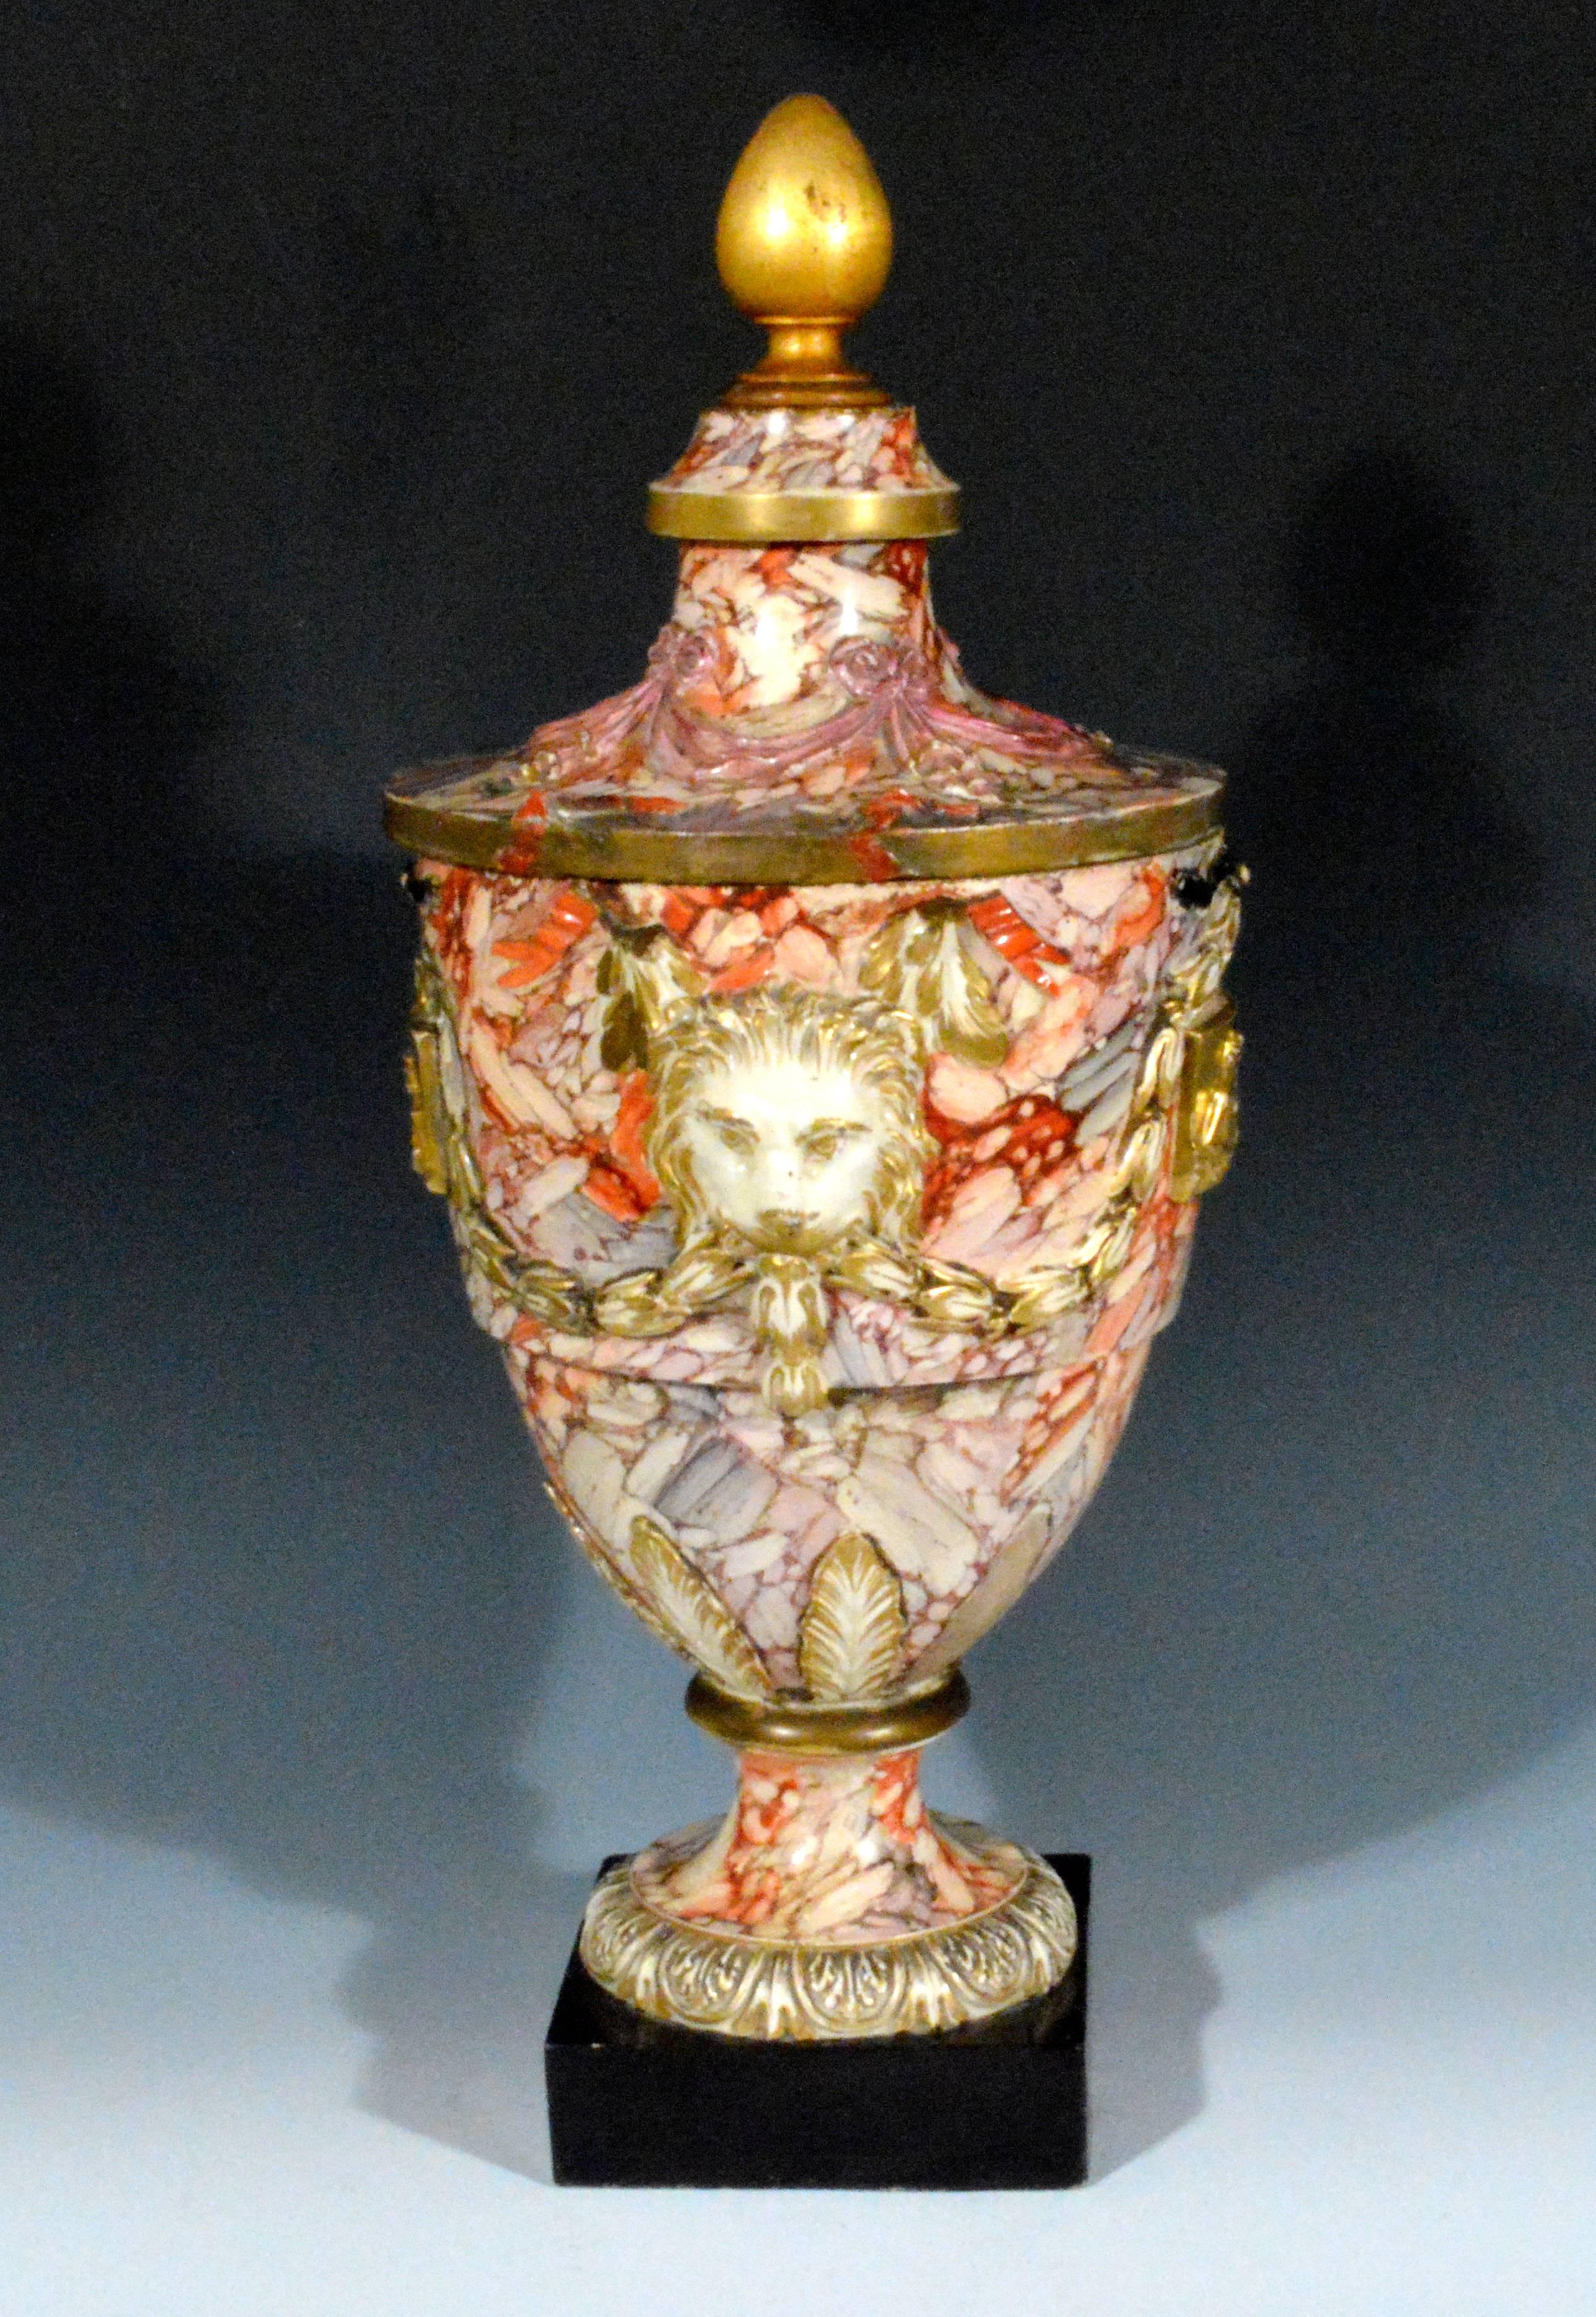 Continental large marbled pottery urn or vase, Baltic region, circa 1790.

The urn painted in a marbled design has a narrow foot sitting on a square black pottery base rising to a circular body with applied lion-head masks highlighted in gilt to